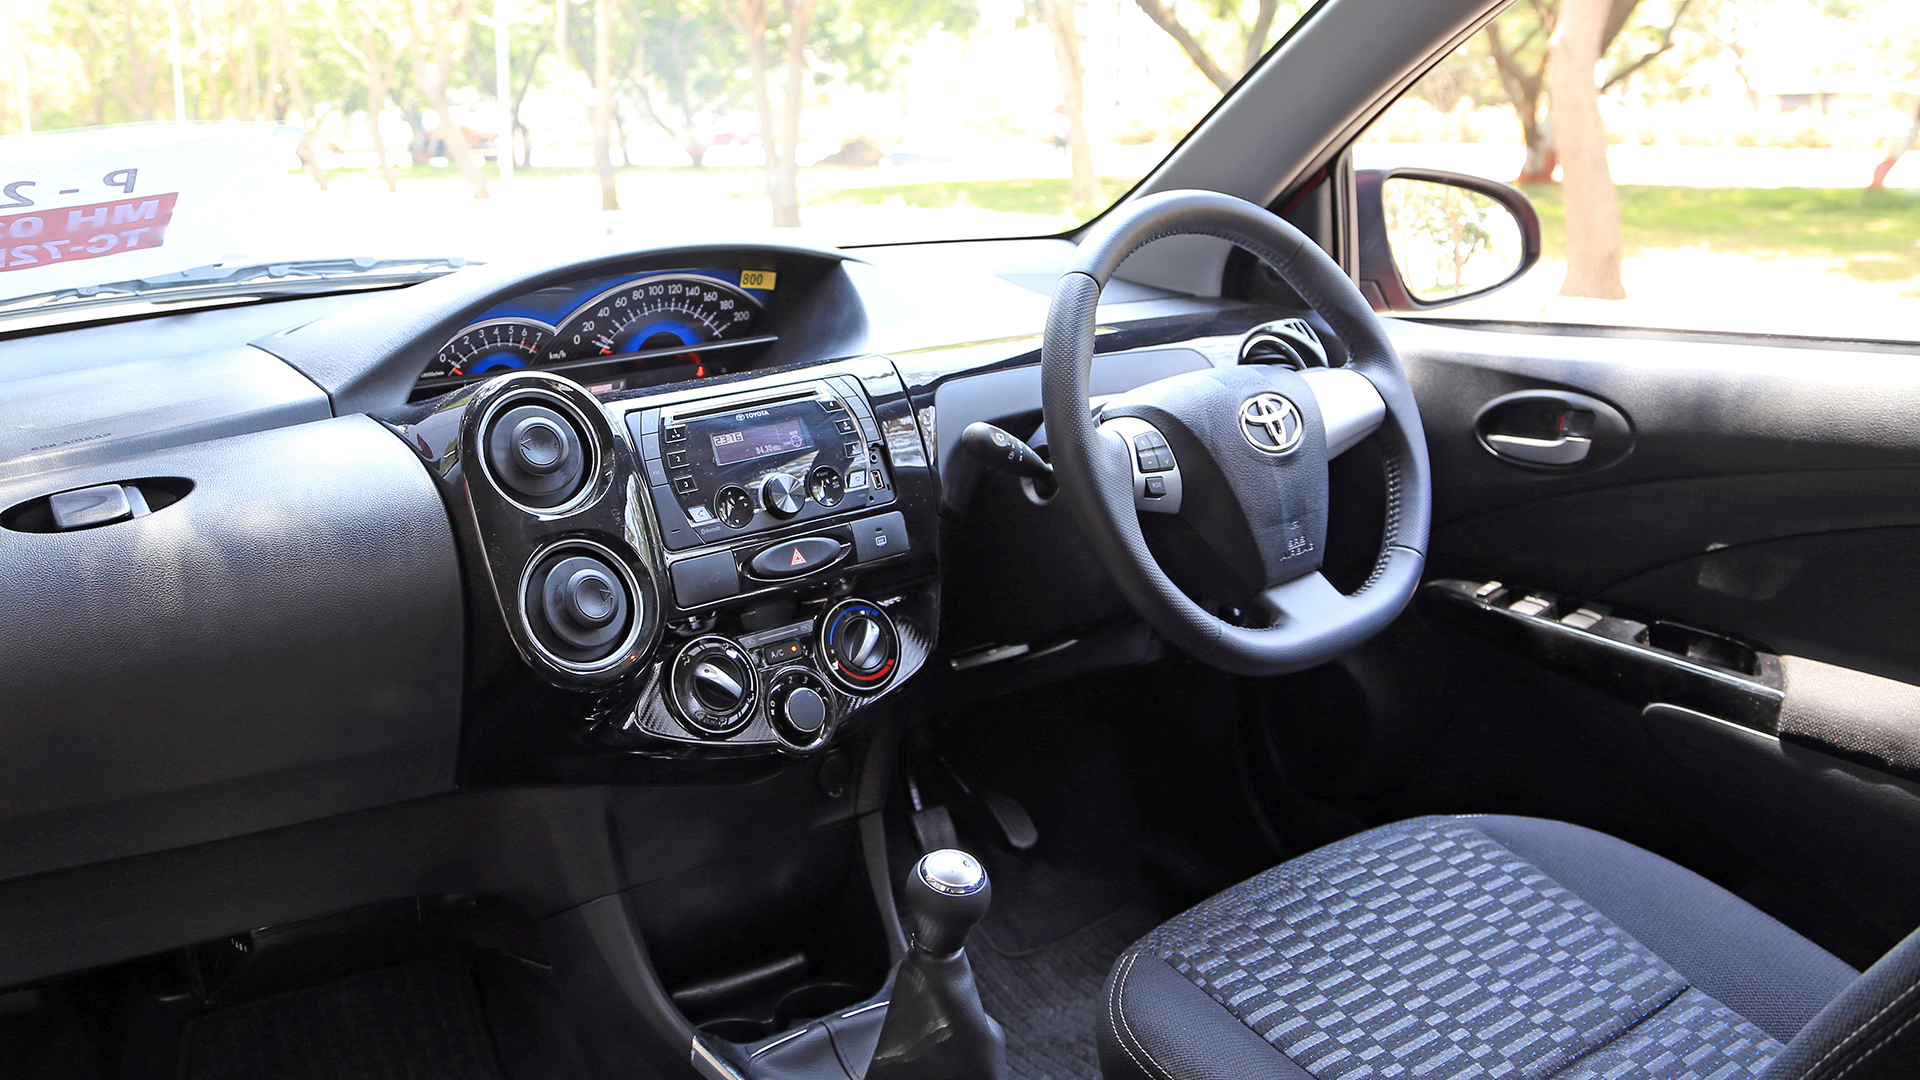 Toyota Etios 2015 VX Petrol - Price in India, Mileage, Reviews, Colours,  Specification, Images - Overdrive